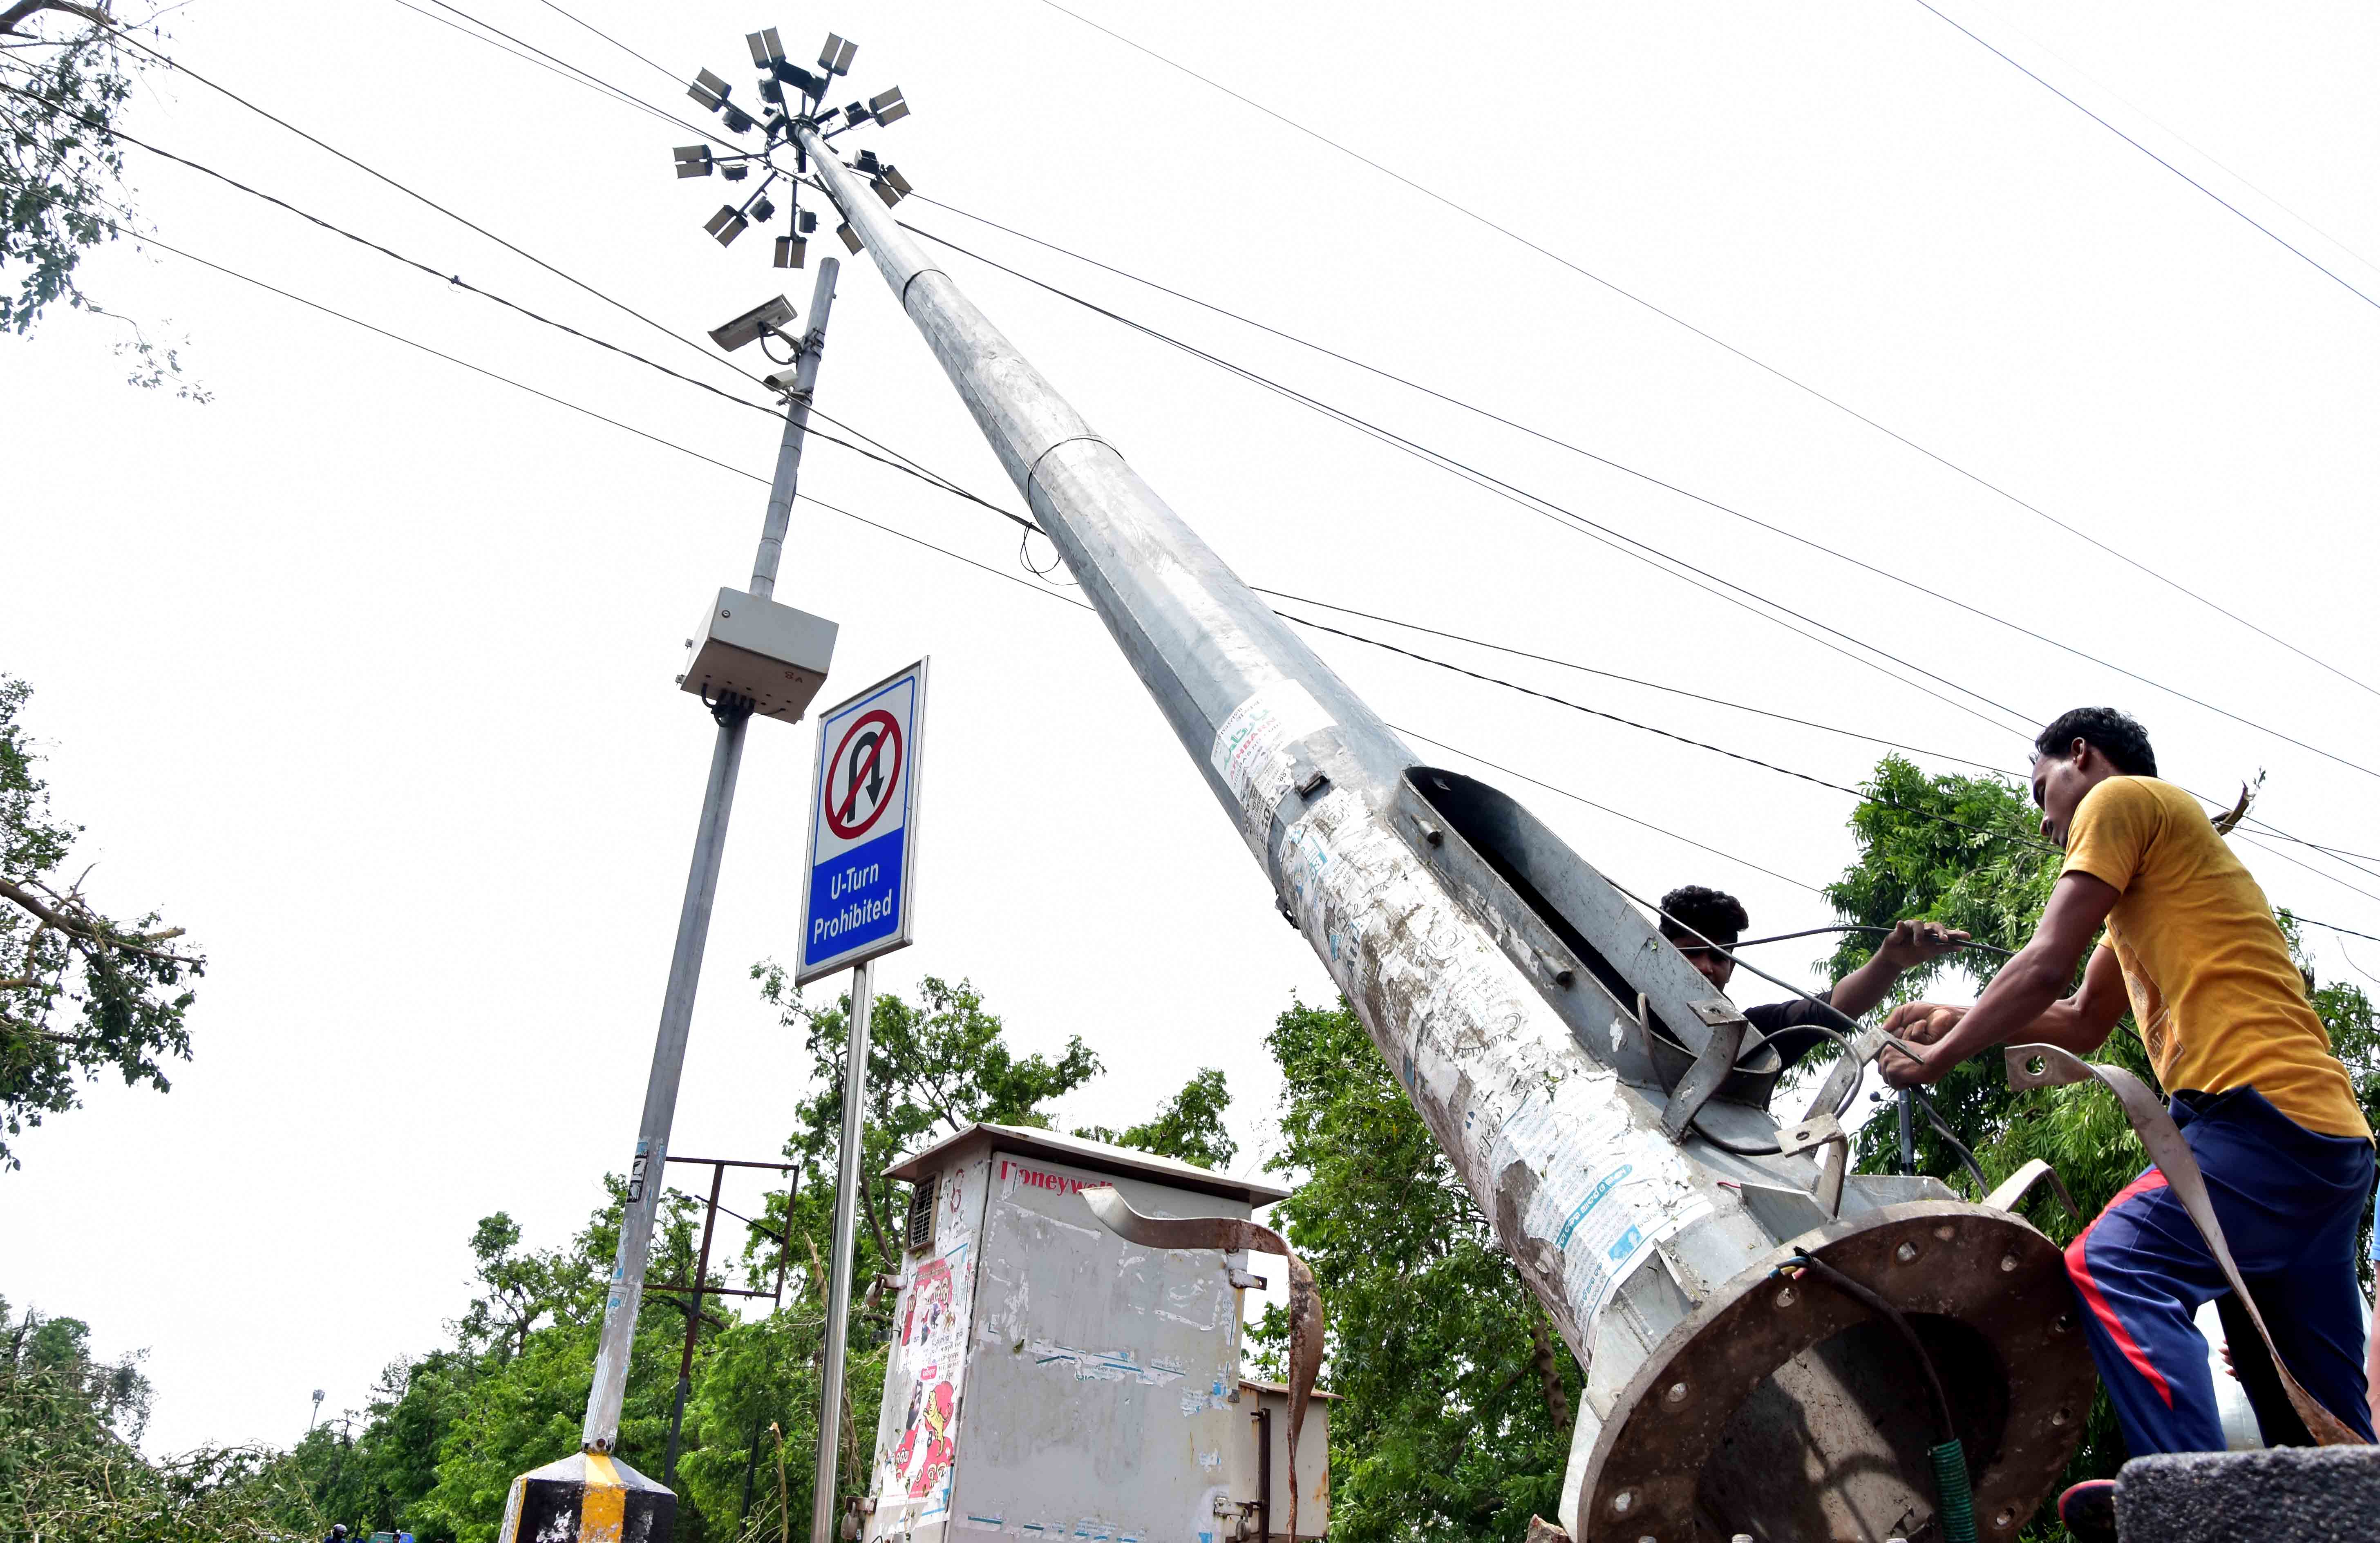 Cyclone Fani damages electric poll near lower PMG square square in Bhubaneswar